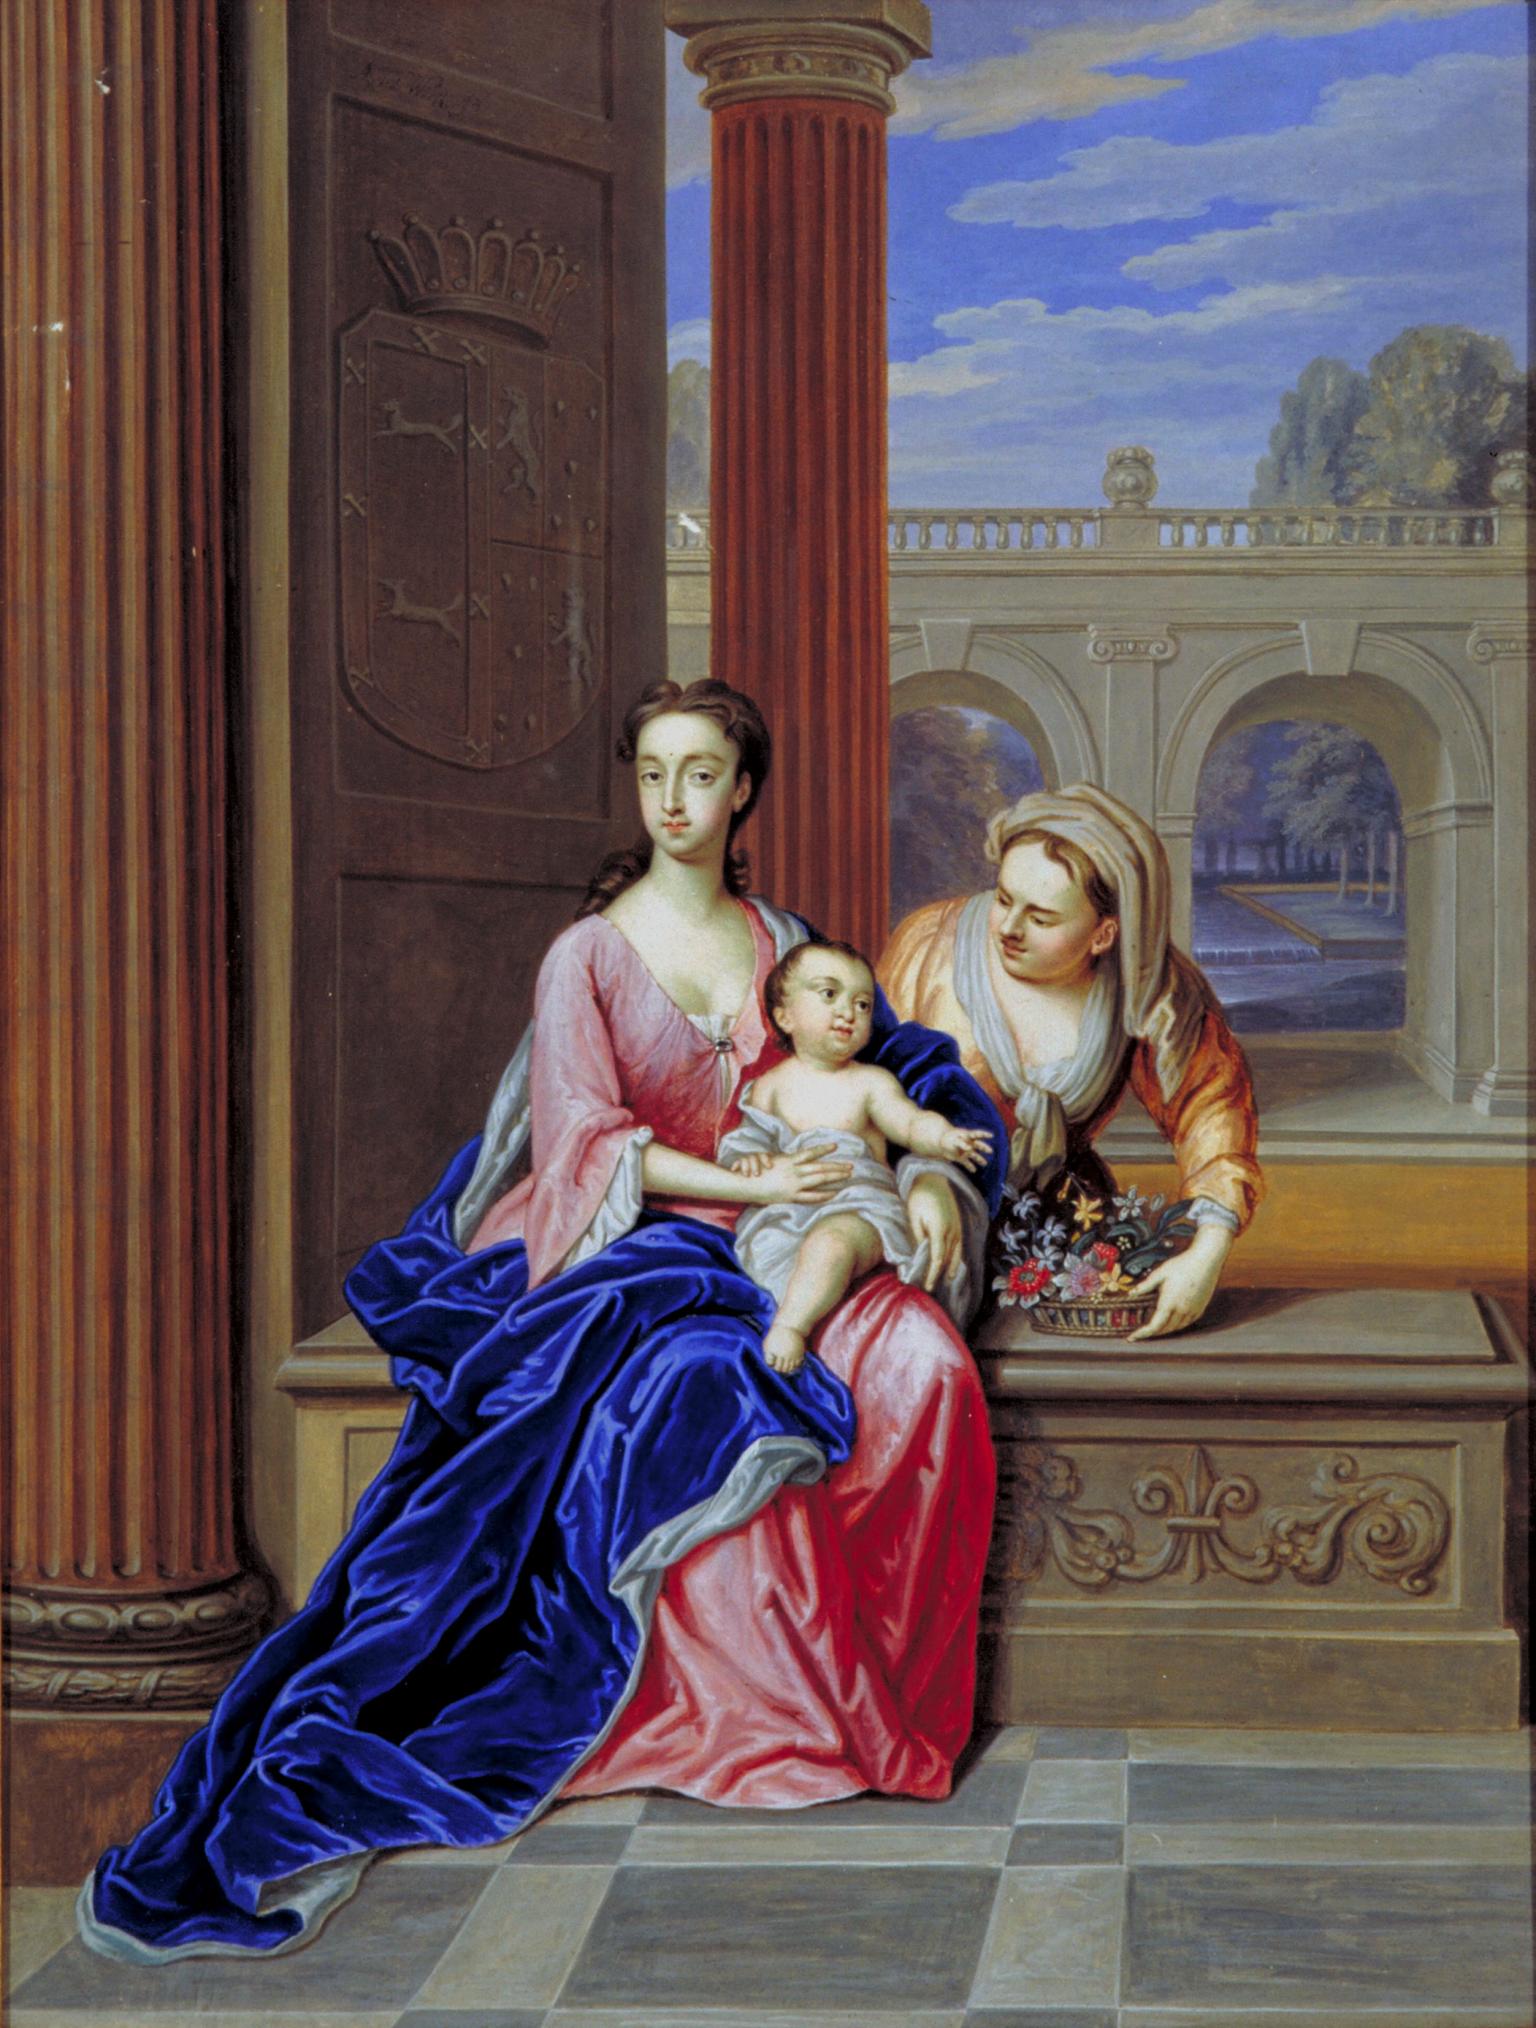 Painting of woman holding baby on bench next to columned doorway as another woman leans over her. 